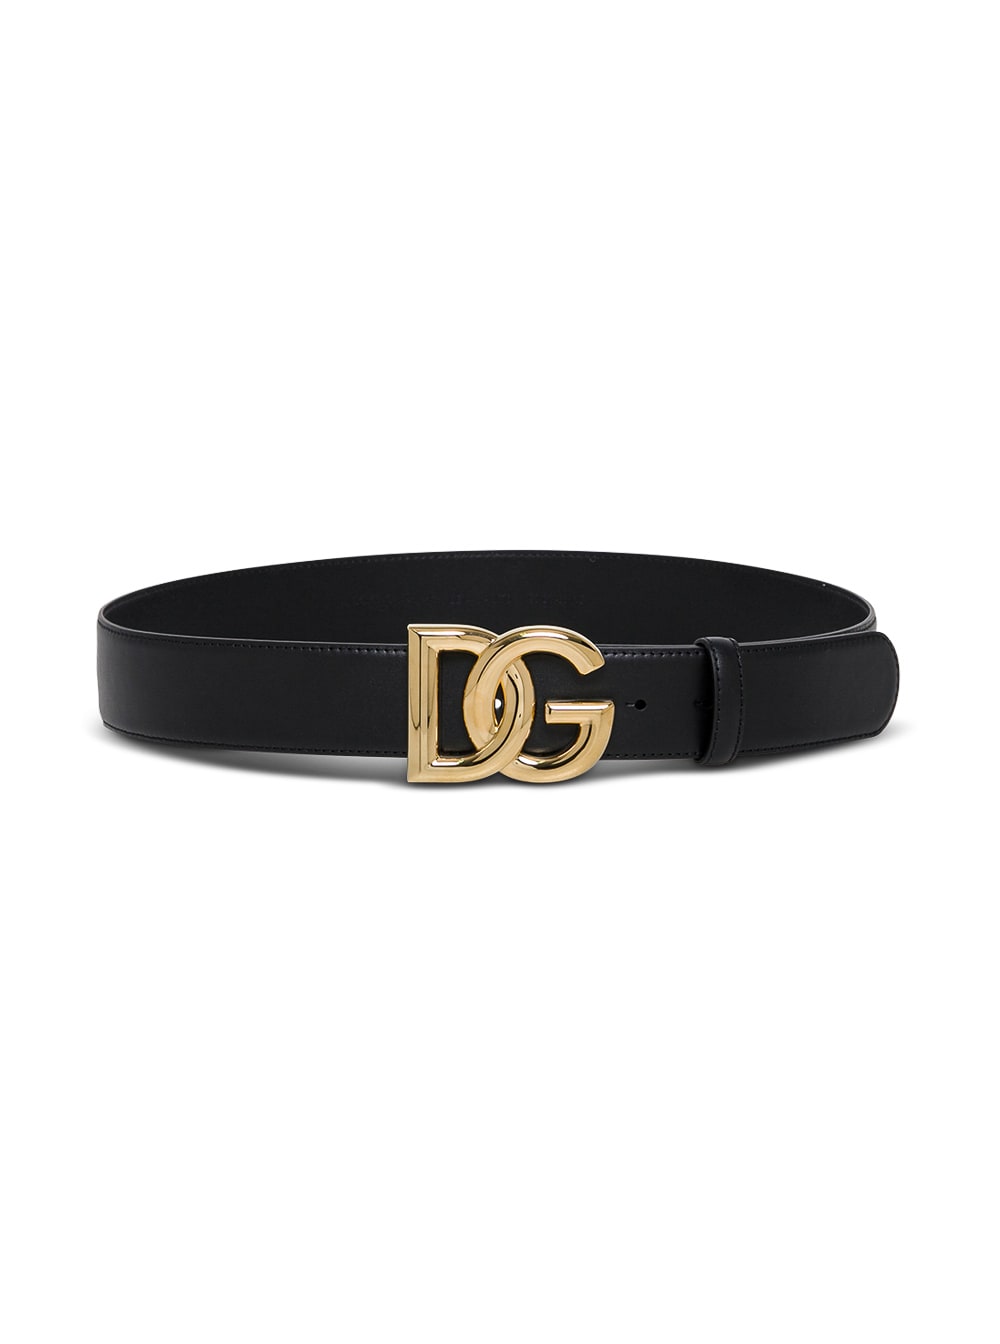 Dolce & Gabbana Woman's Black Leather Belt With Logo Buckle